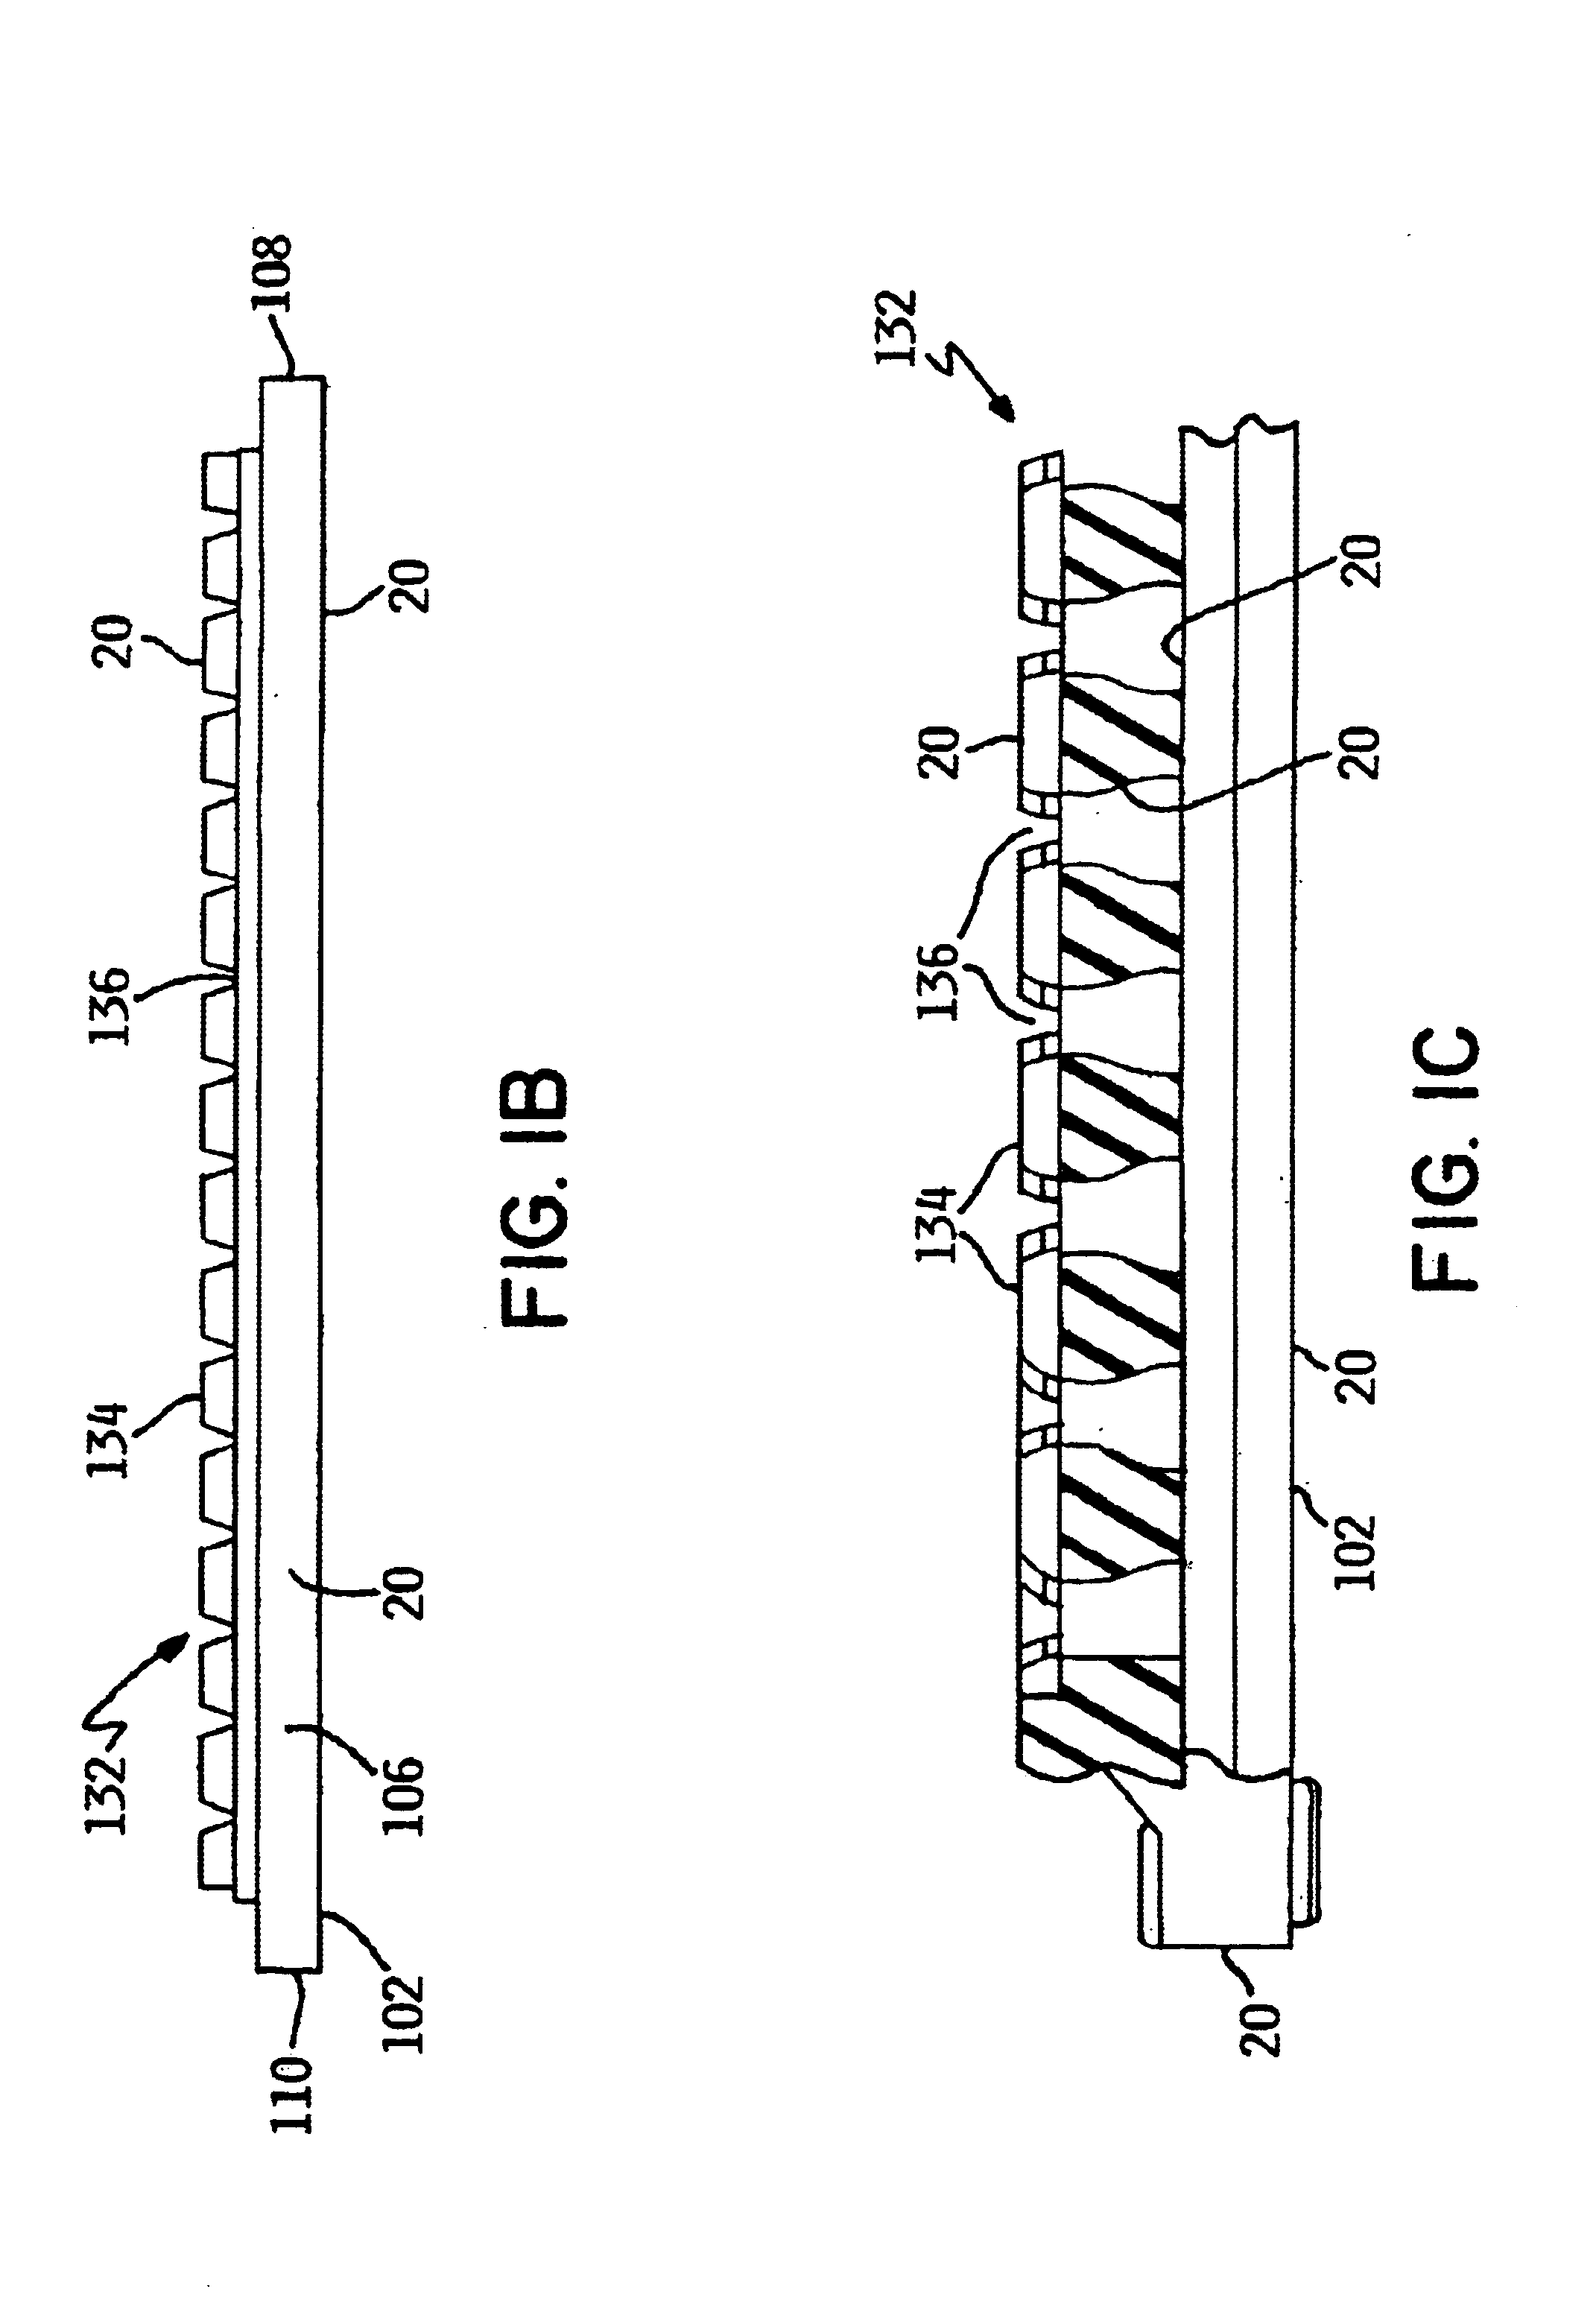 Tray carrier with ultraphobic surfaces